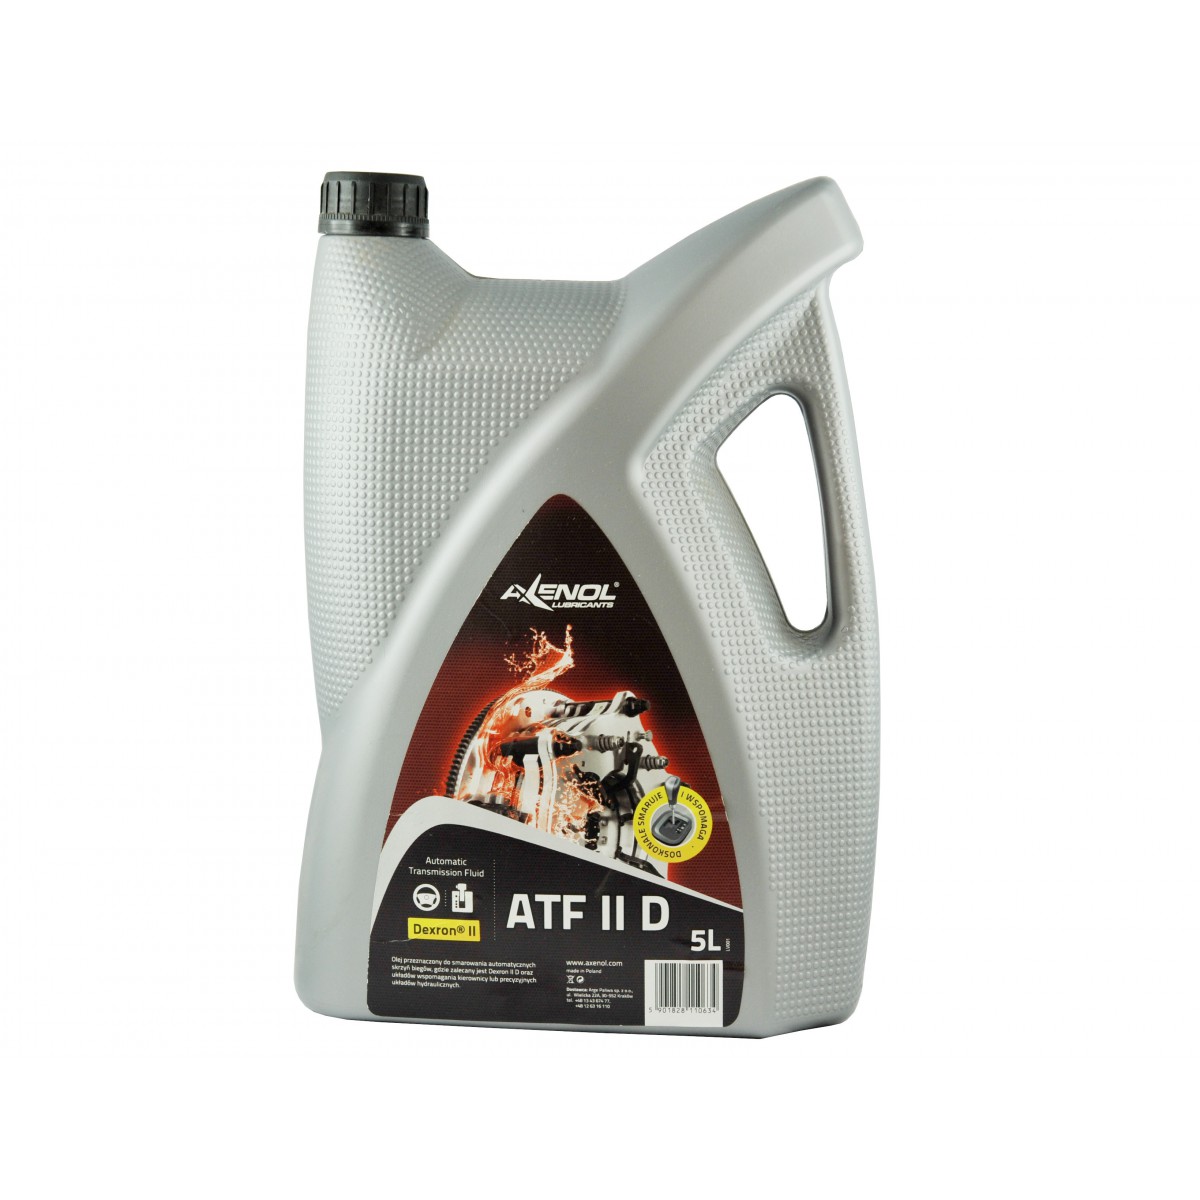 ATV II D AXENOL Lubricants & Grease gear oil for automatic transmissions